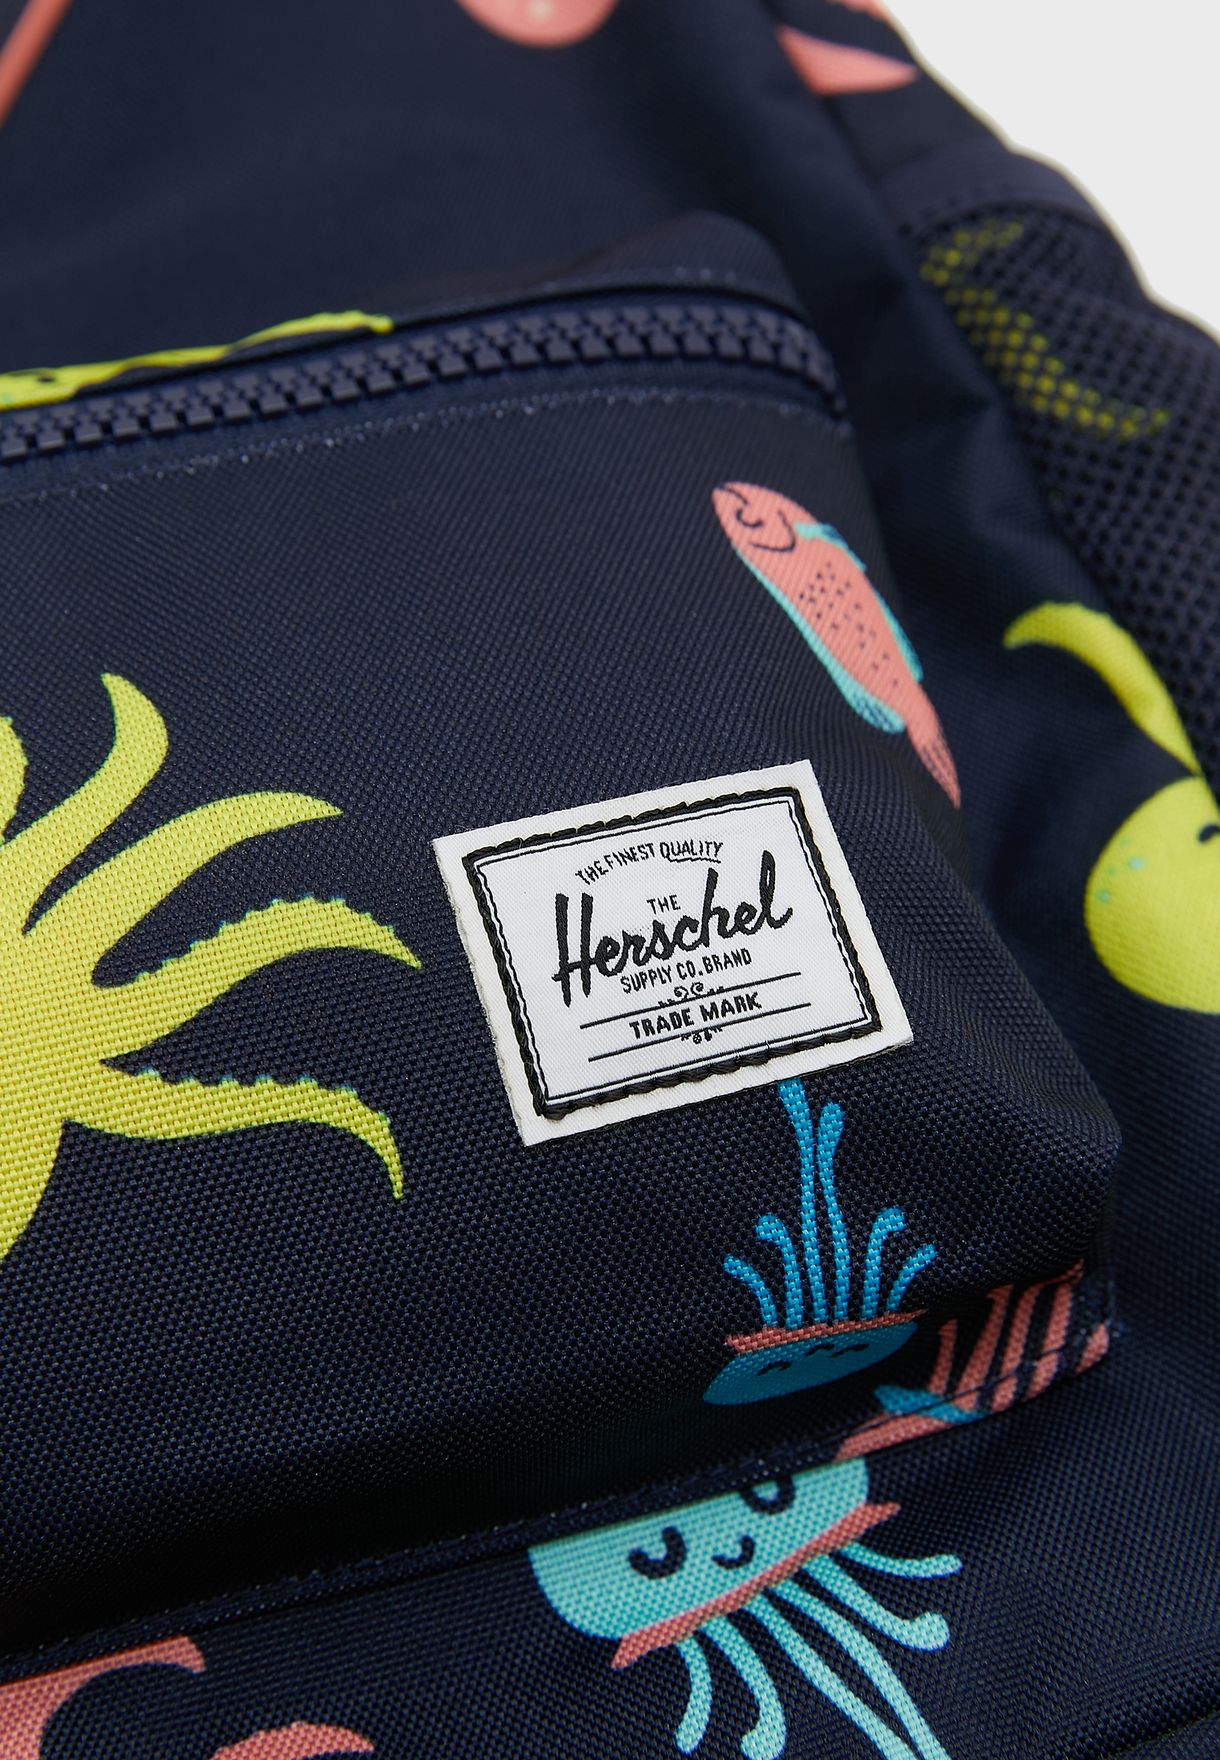 Youth Into The Sea Backpack